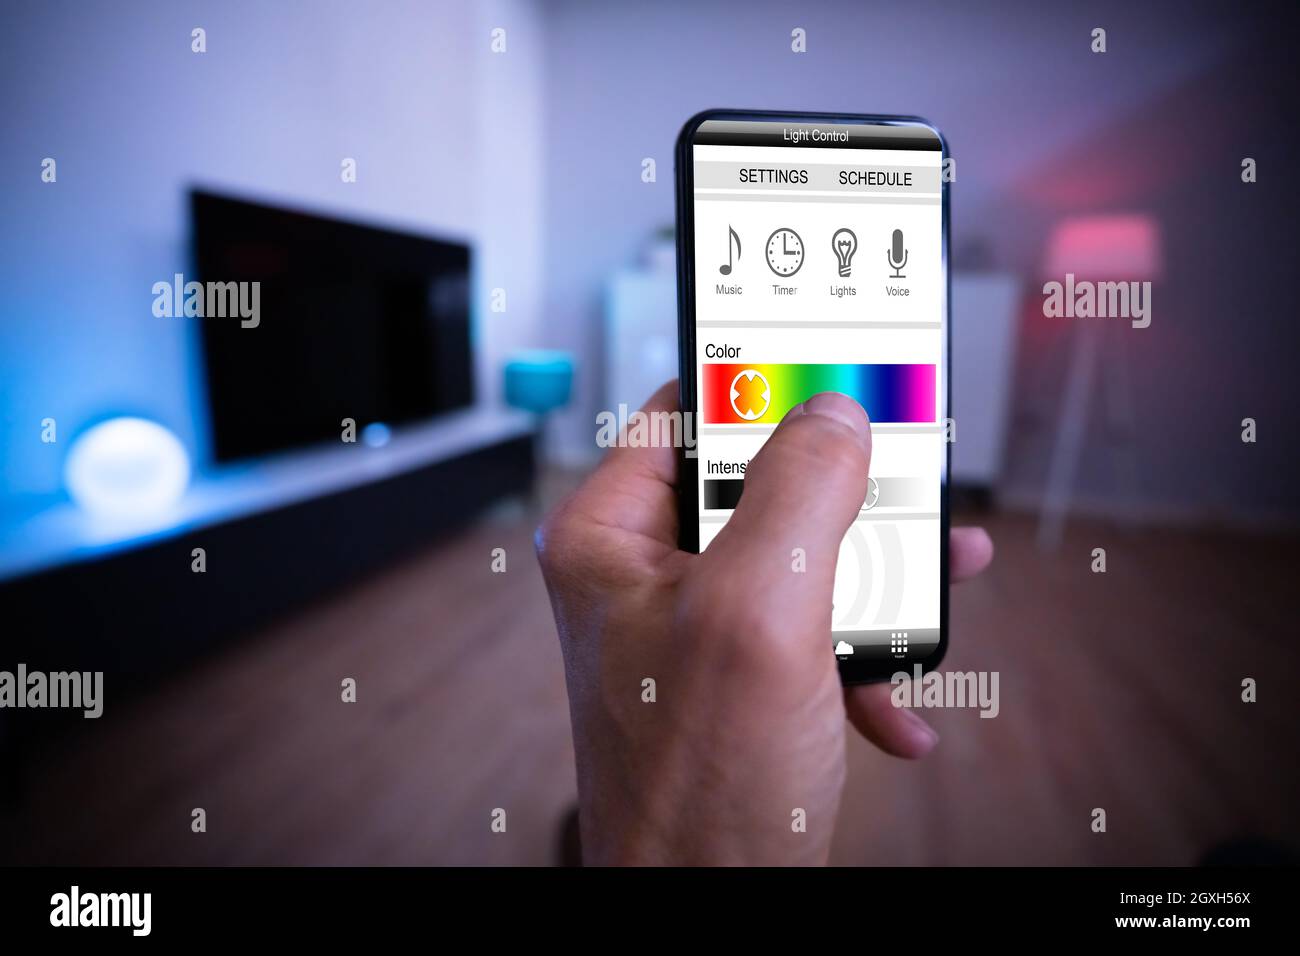 Smart Light Control Using Mobile Phone And Smarthome Stock Photo